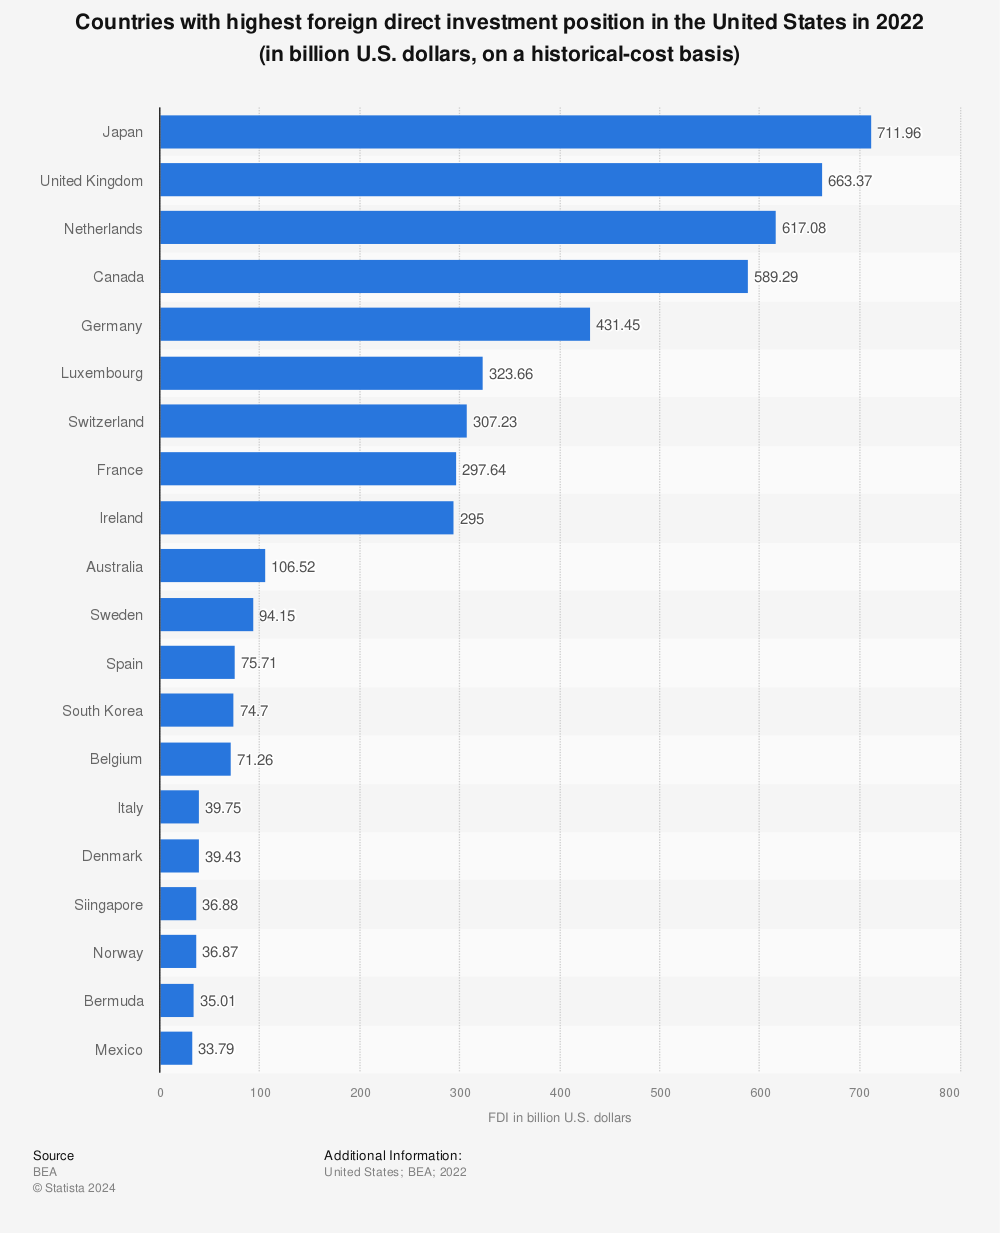 Statistic: Countries with highest foreign direct investment position in the United States in 2022 (in billion U.S. dollars, on a historical-cost basis) | Statista